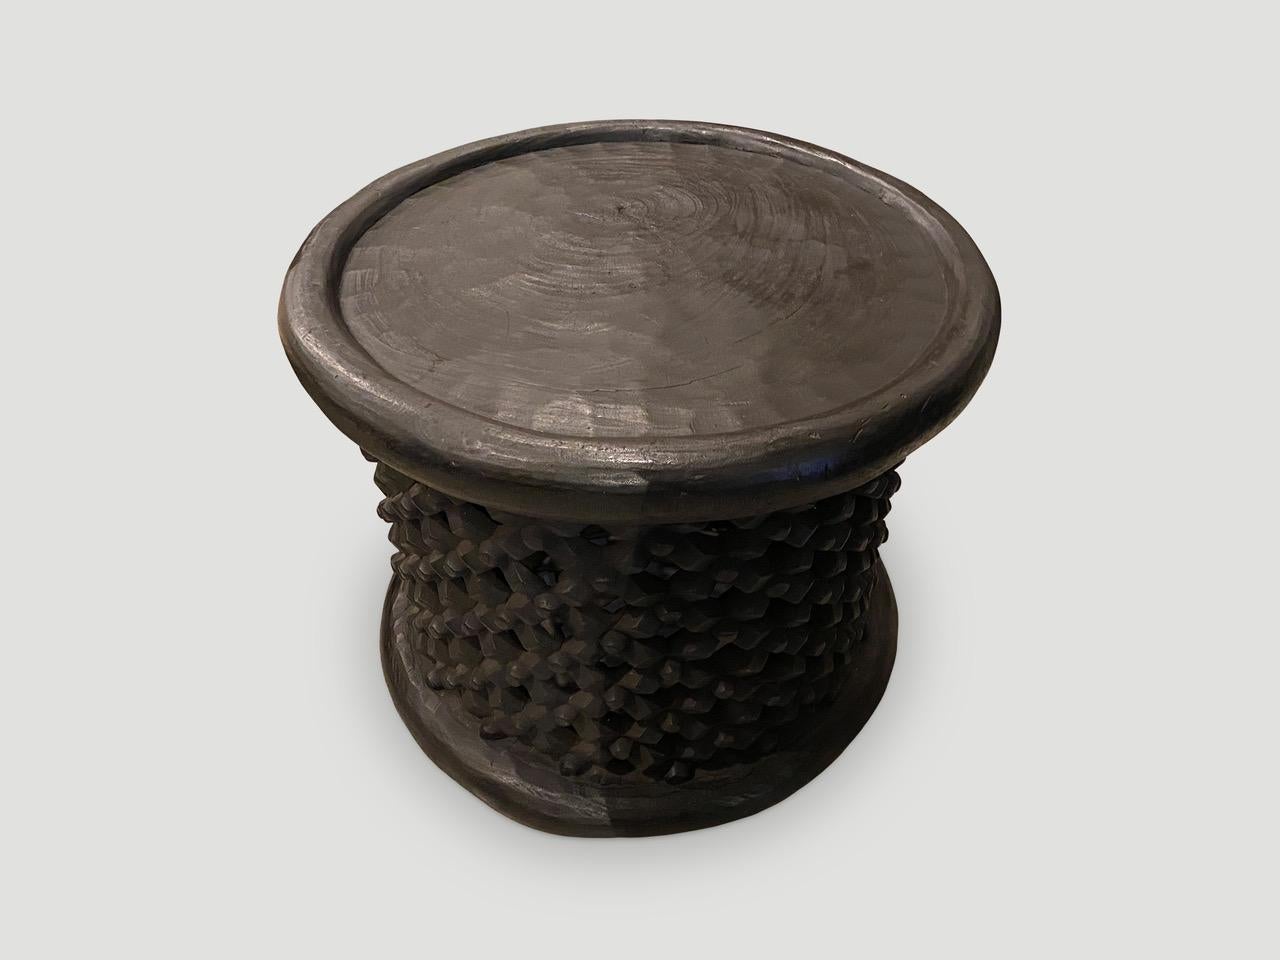 African coffee table or side table hand carved from one piece of wood from Cameroon, featuring a lattice pattern. We have stained the entire piece black. We only source the best.

This coffee table or side table was sourced in the spirit of